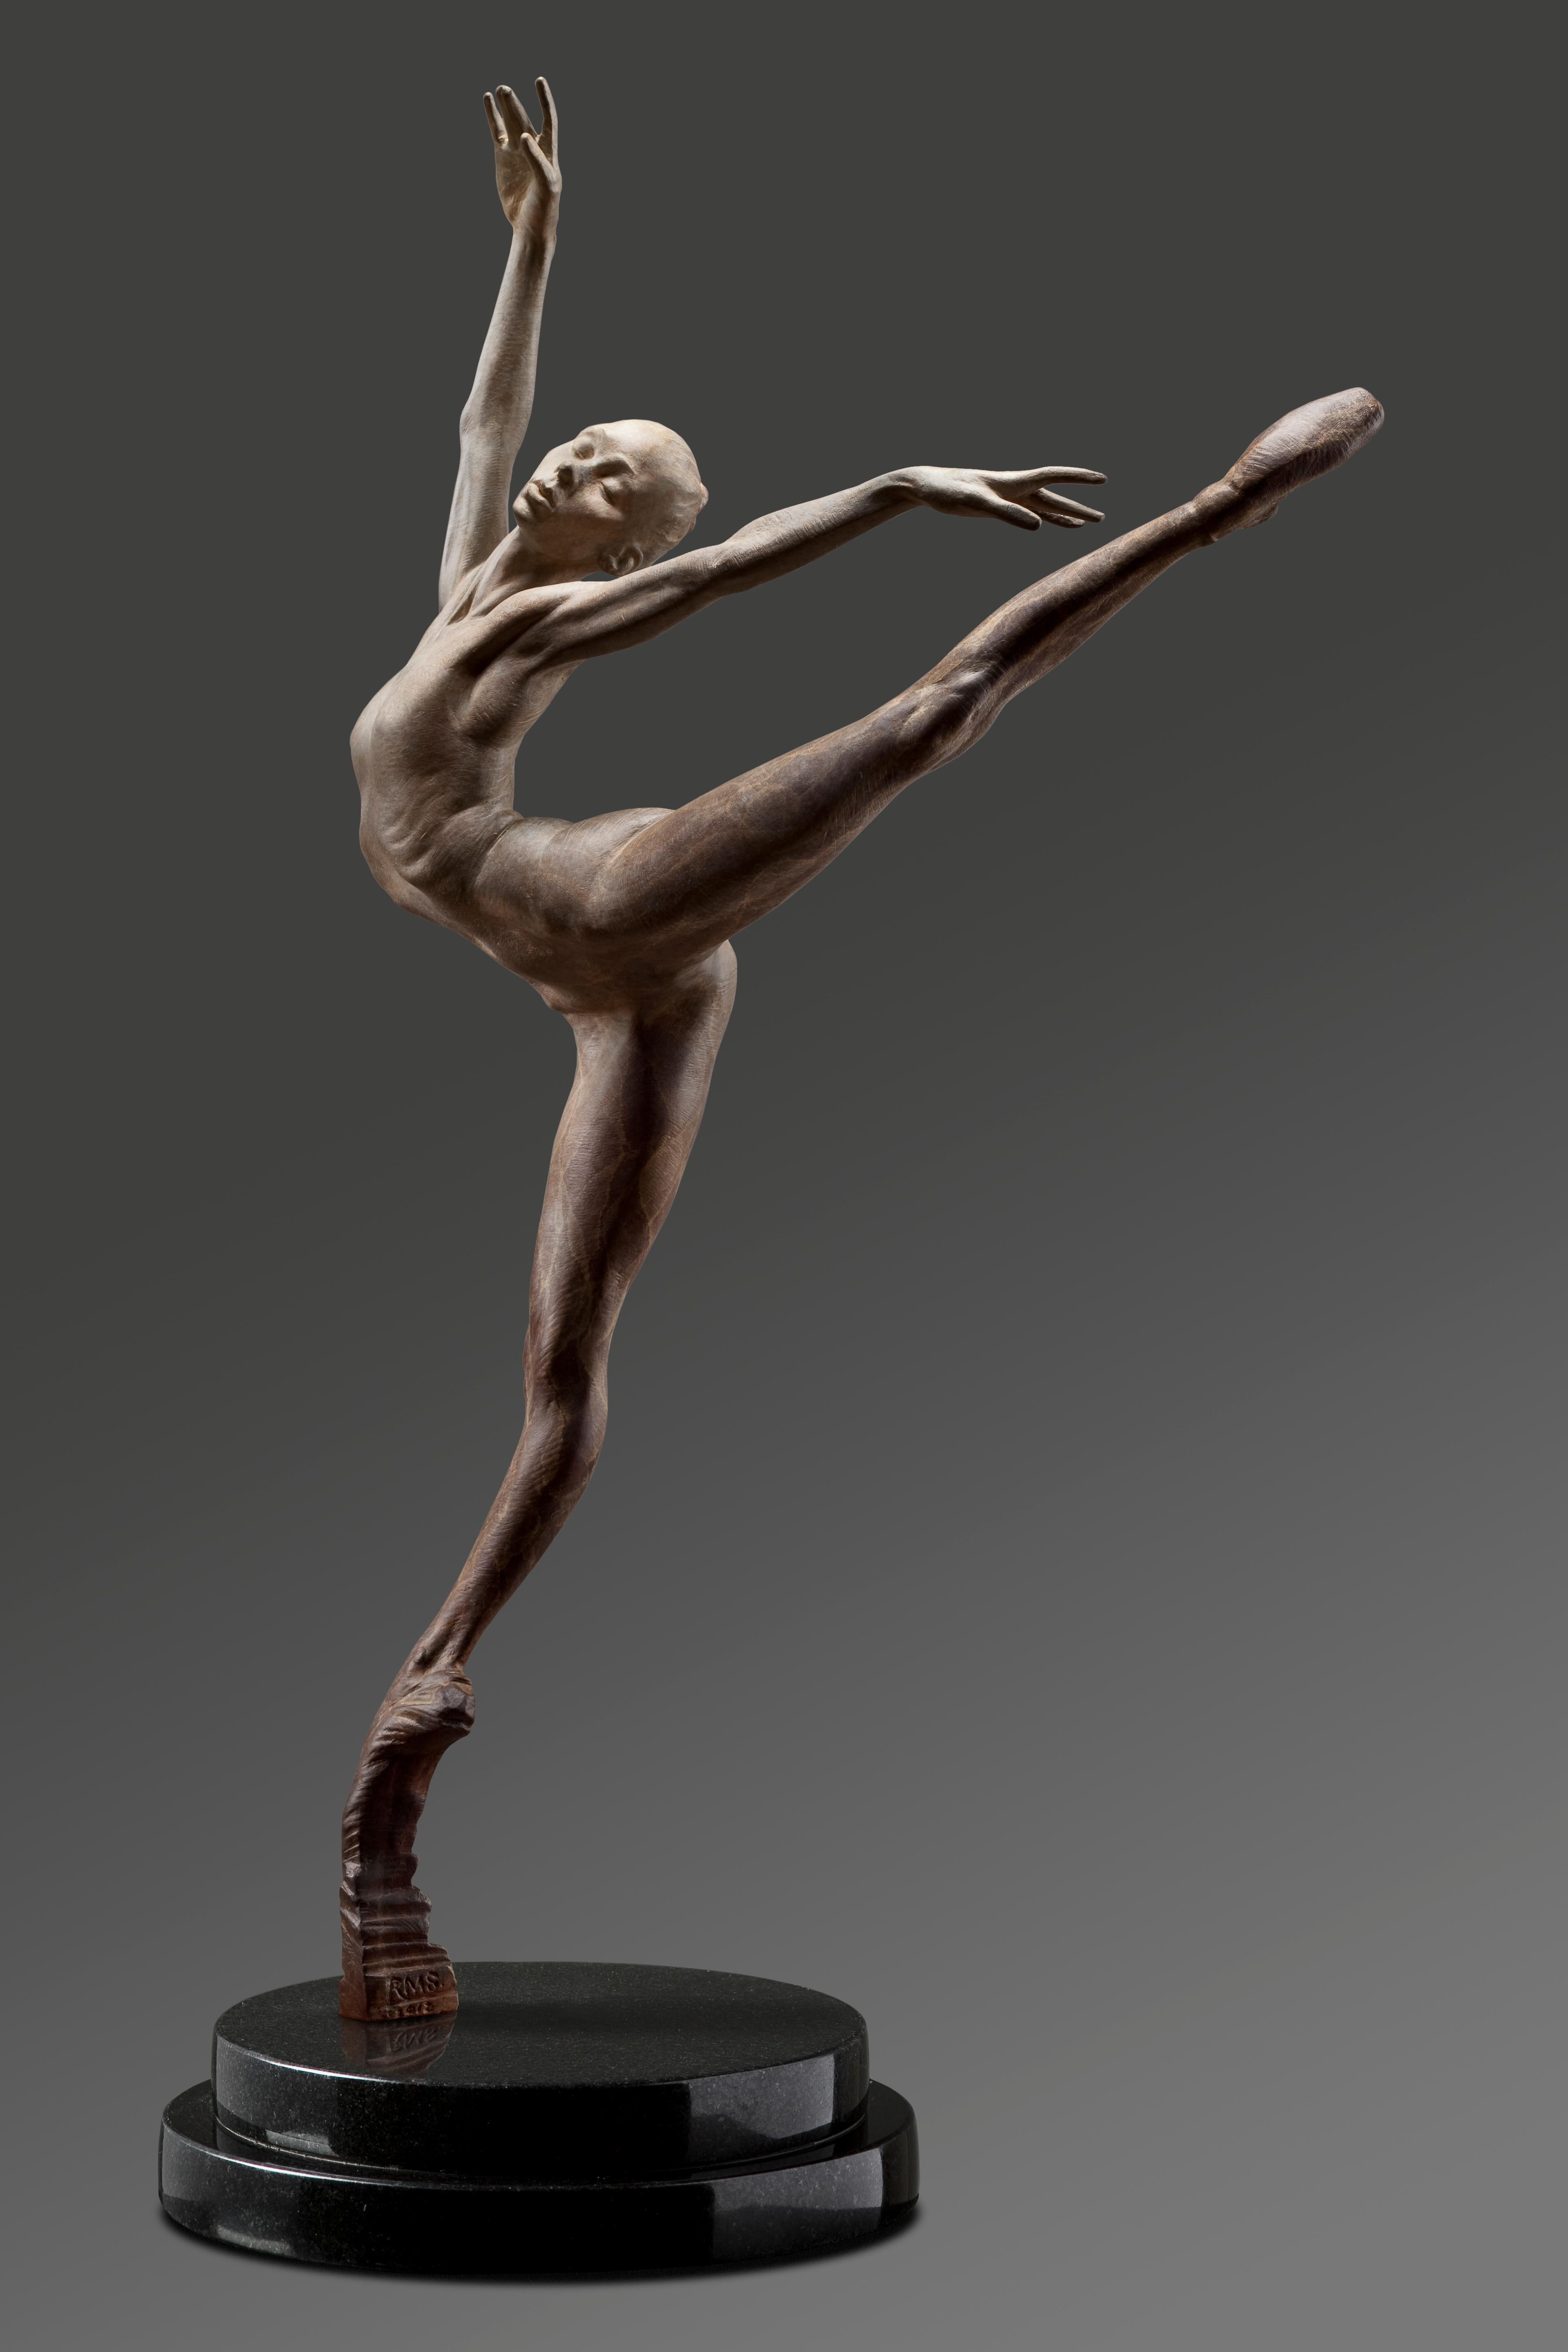 After devoting more than twenty years to the perfection of the human form in bronze, Richard MacDonald focused on a series of sculptures based on his work with dancers from the Royal Ballet. The studies were designed to be the groundwork for the